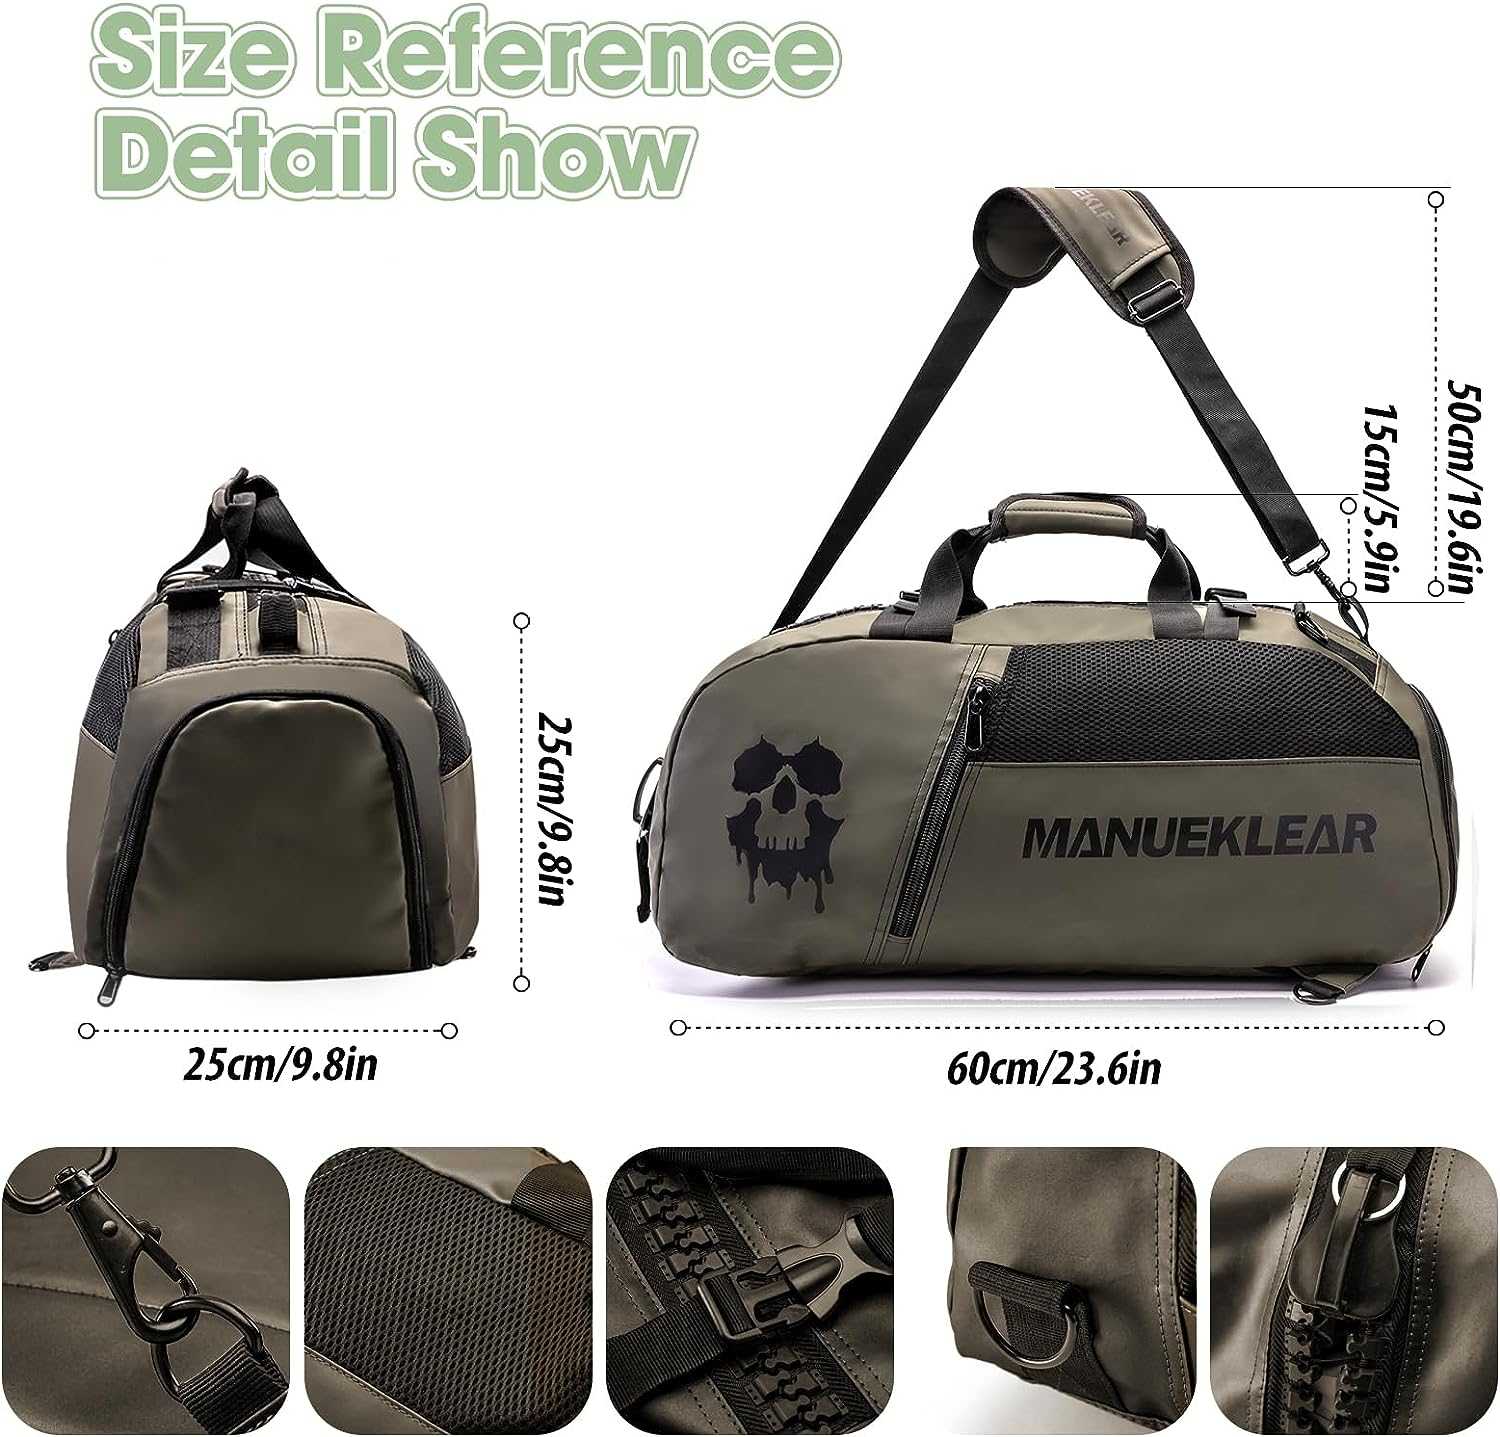  Lfzhjzc Gym Bag, with Shoes Compartment Gym Bags for